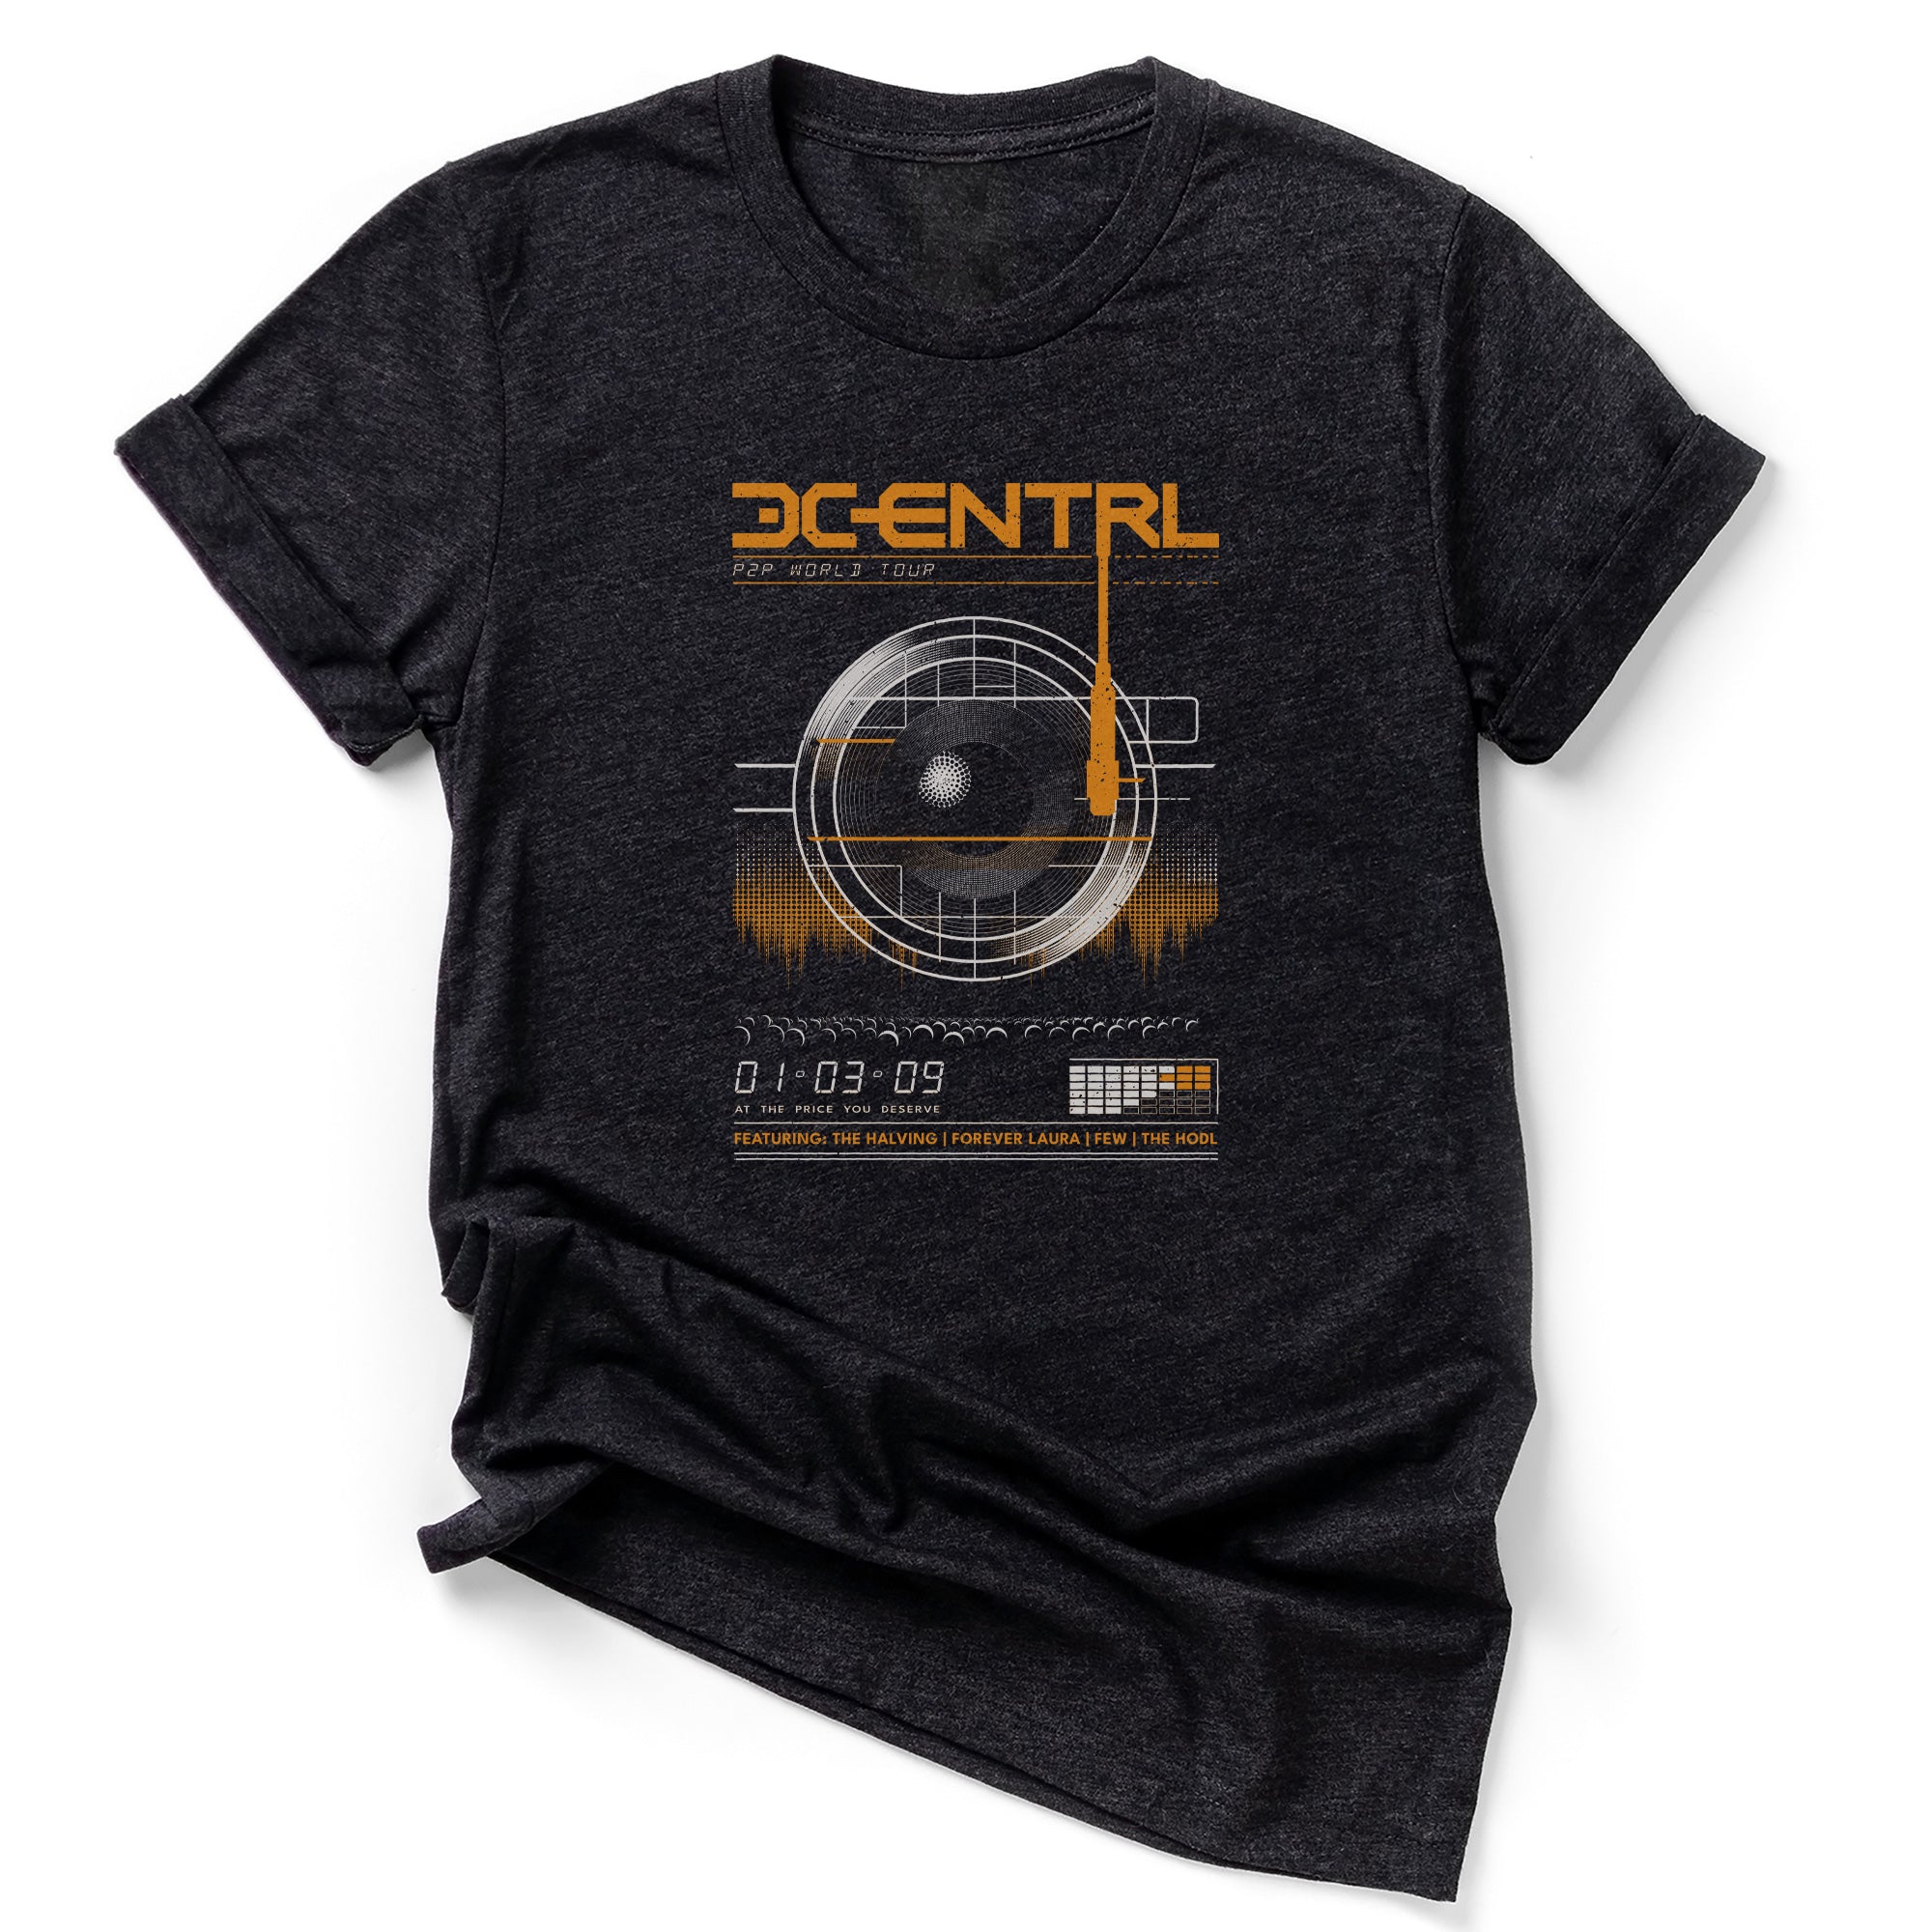 Dcentrl Band T-Shirt